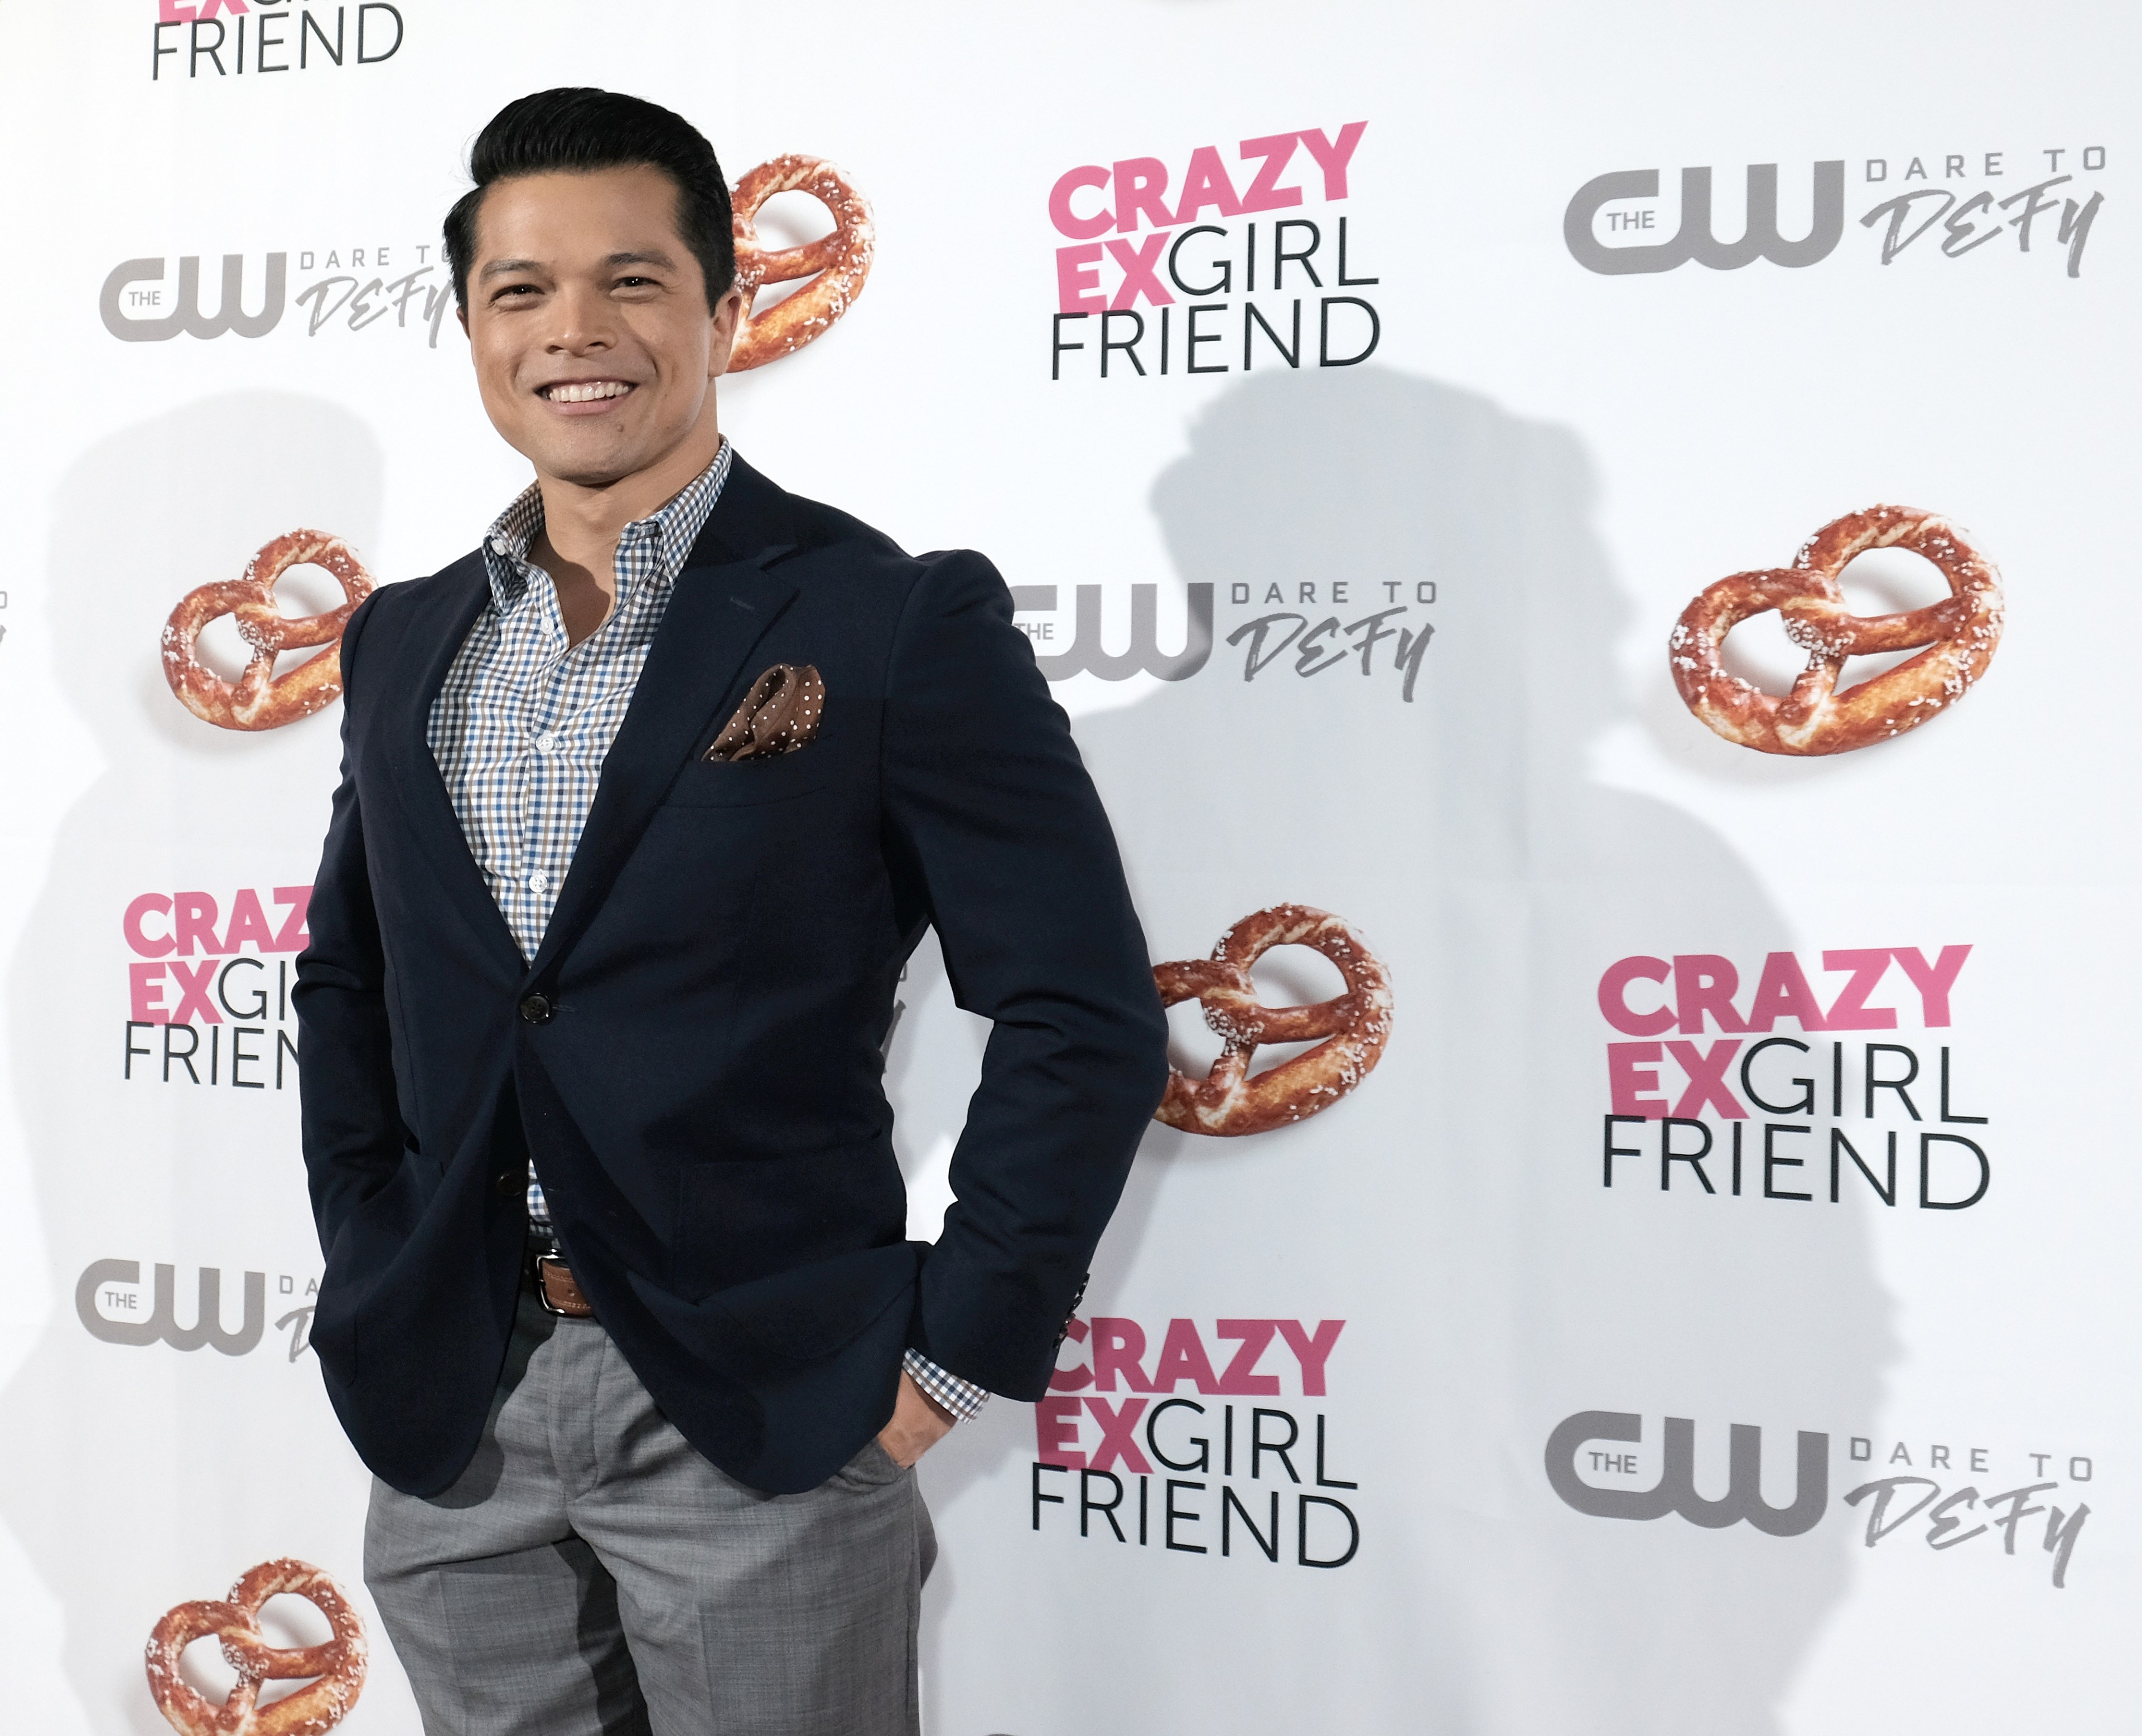 A smiling man in a sports coat poses at a TV show premiere.